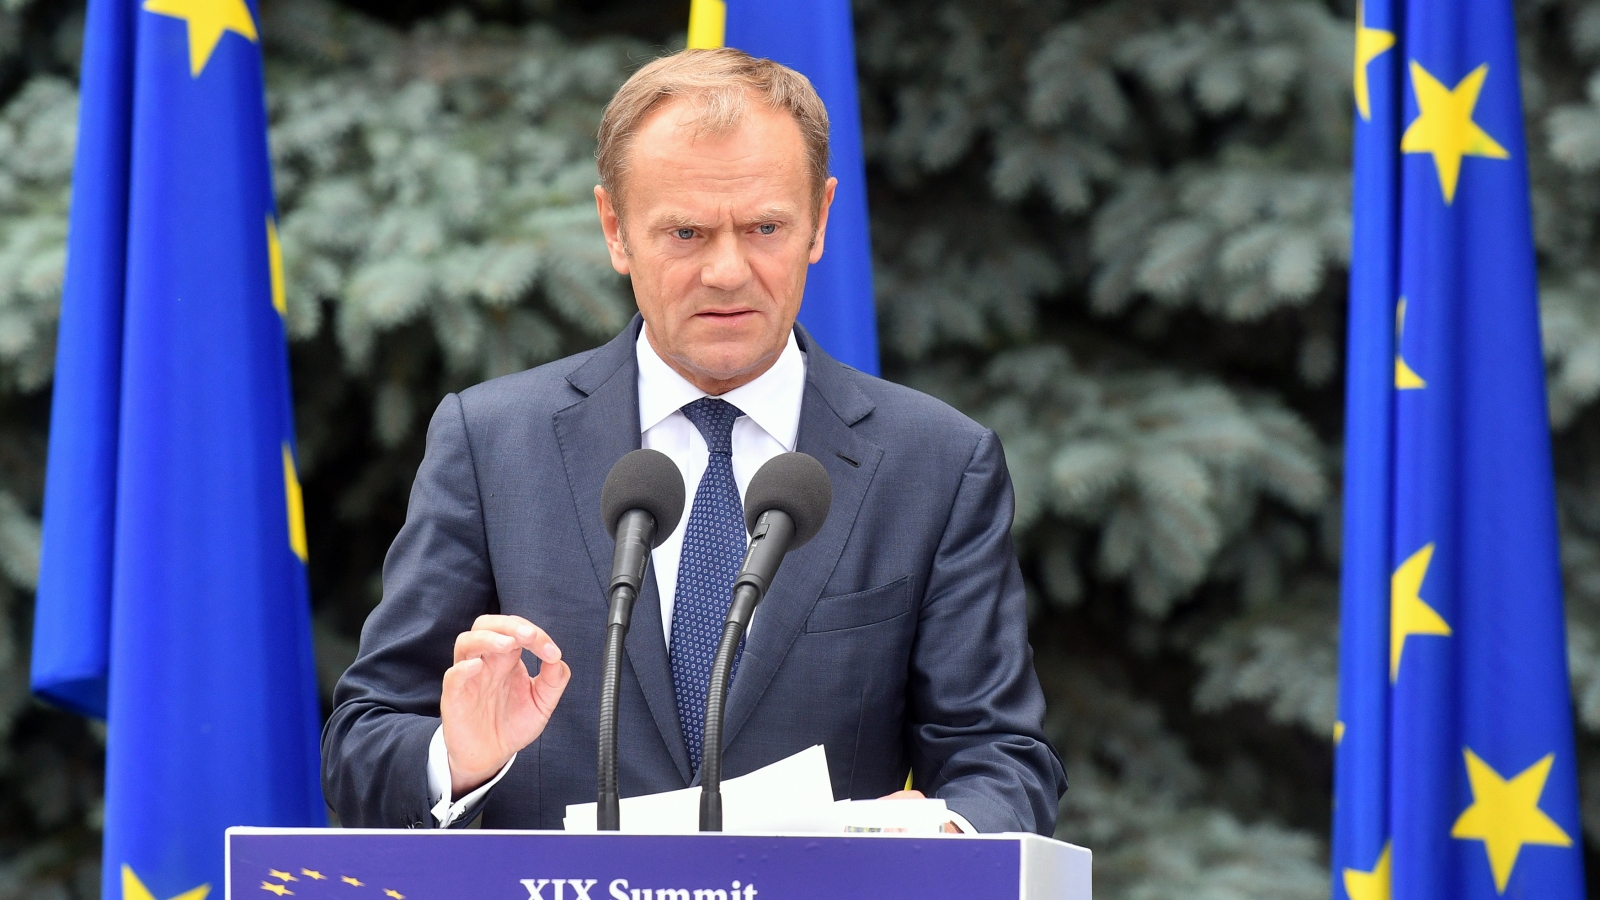 Donald Tusk at EU-Ukraine summit: “Together we have achieved a lot”